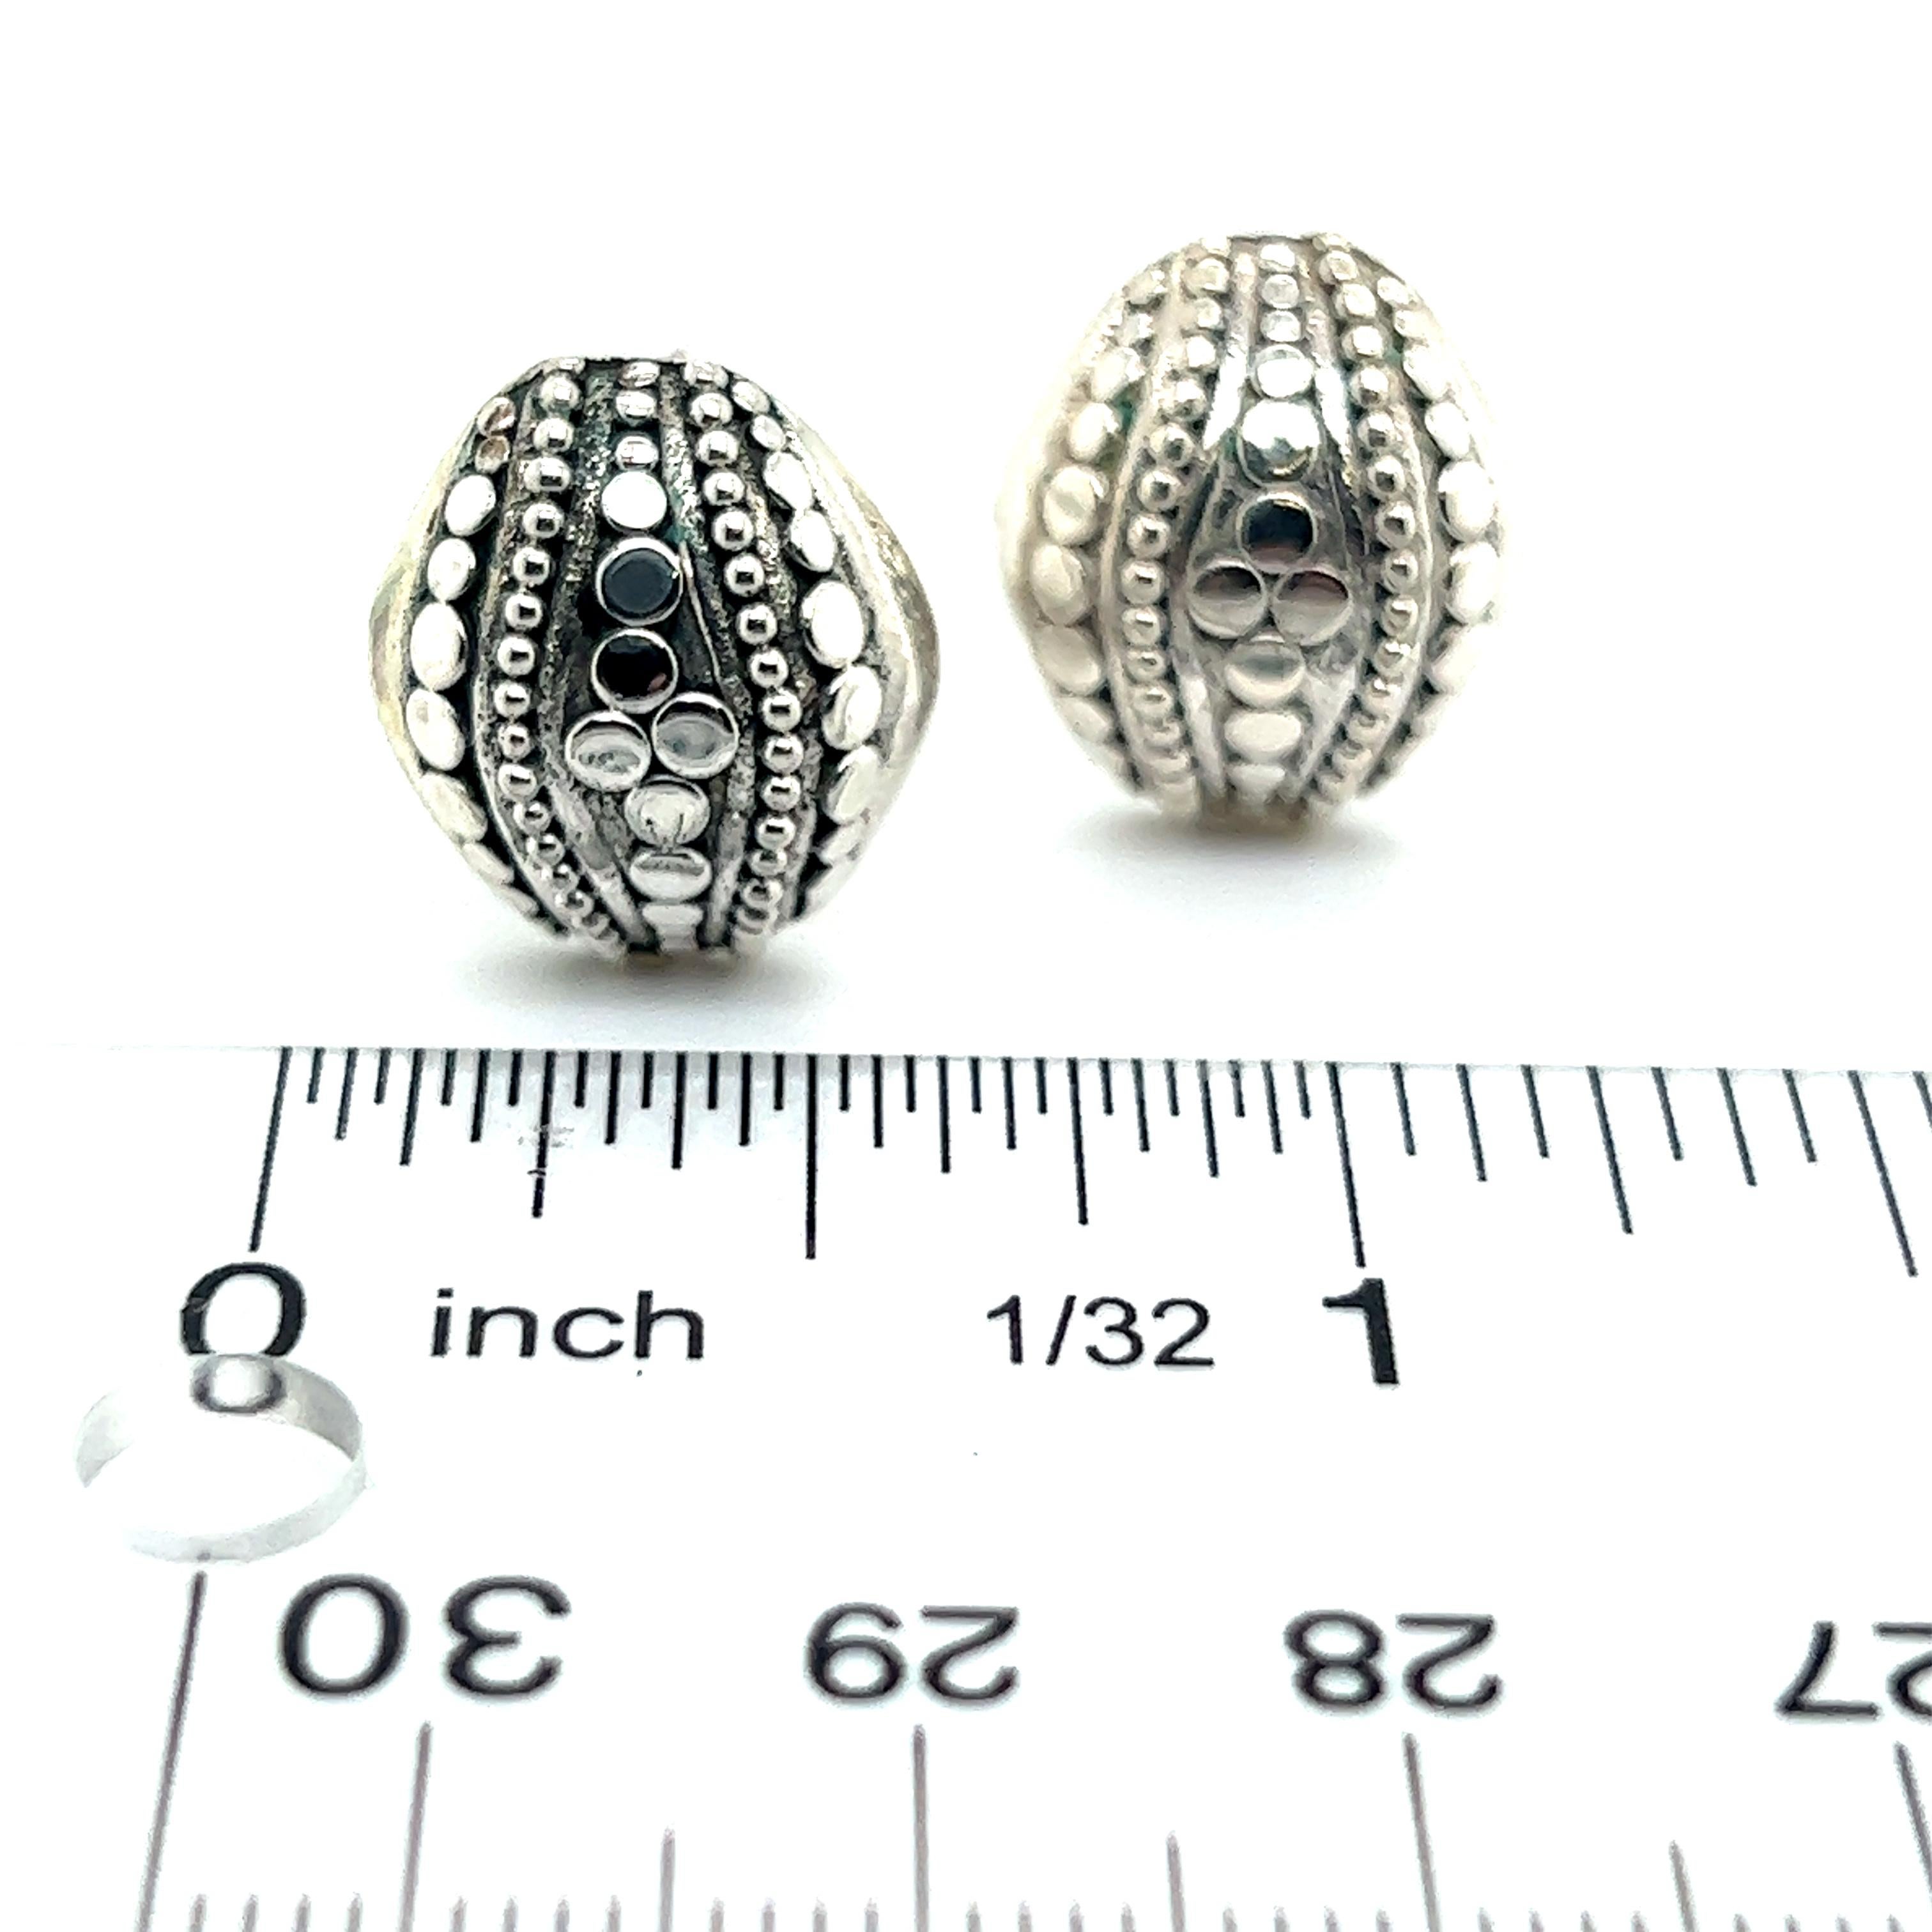 Authentic John Hardy Estate Jaisalmer Domed Dot Omega Back Earrings Silver JH62

TRUSTED SELLER SINCE 2002

PLEASE SEE OUR HUNDREDS OF POSITIVE FEEDBACKS FROM OUR CLIENTS!!

FREE SHIPPING!!

DETAILS
Style: Omega Back
Weight: 8.50 Grams
Jaisalmer